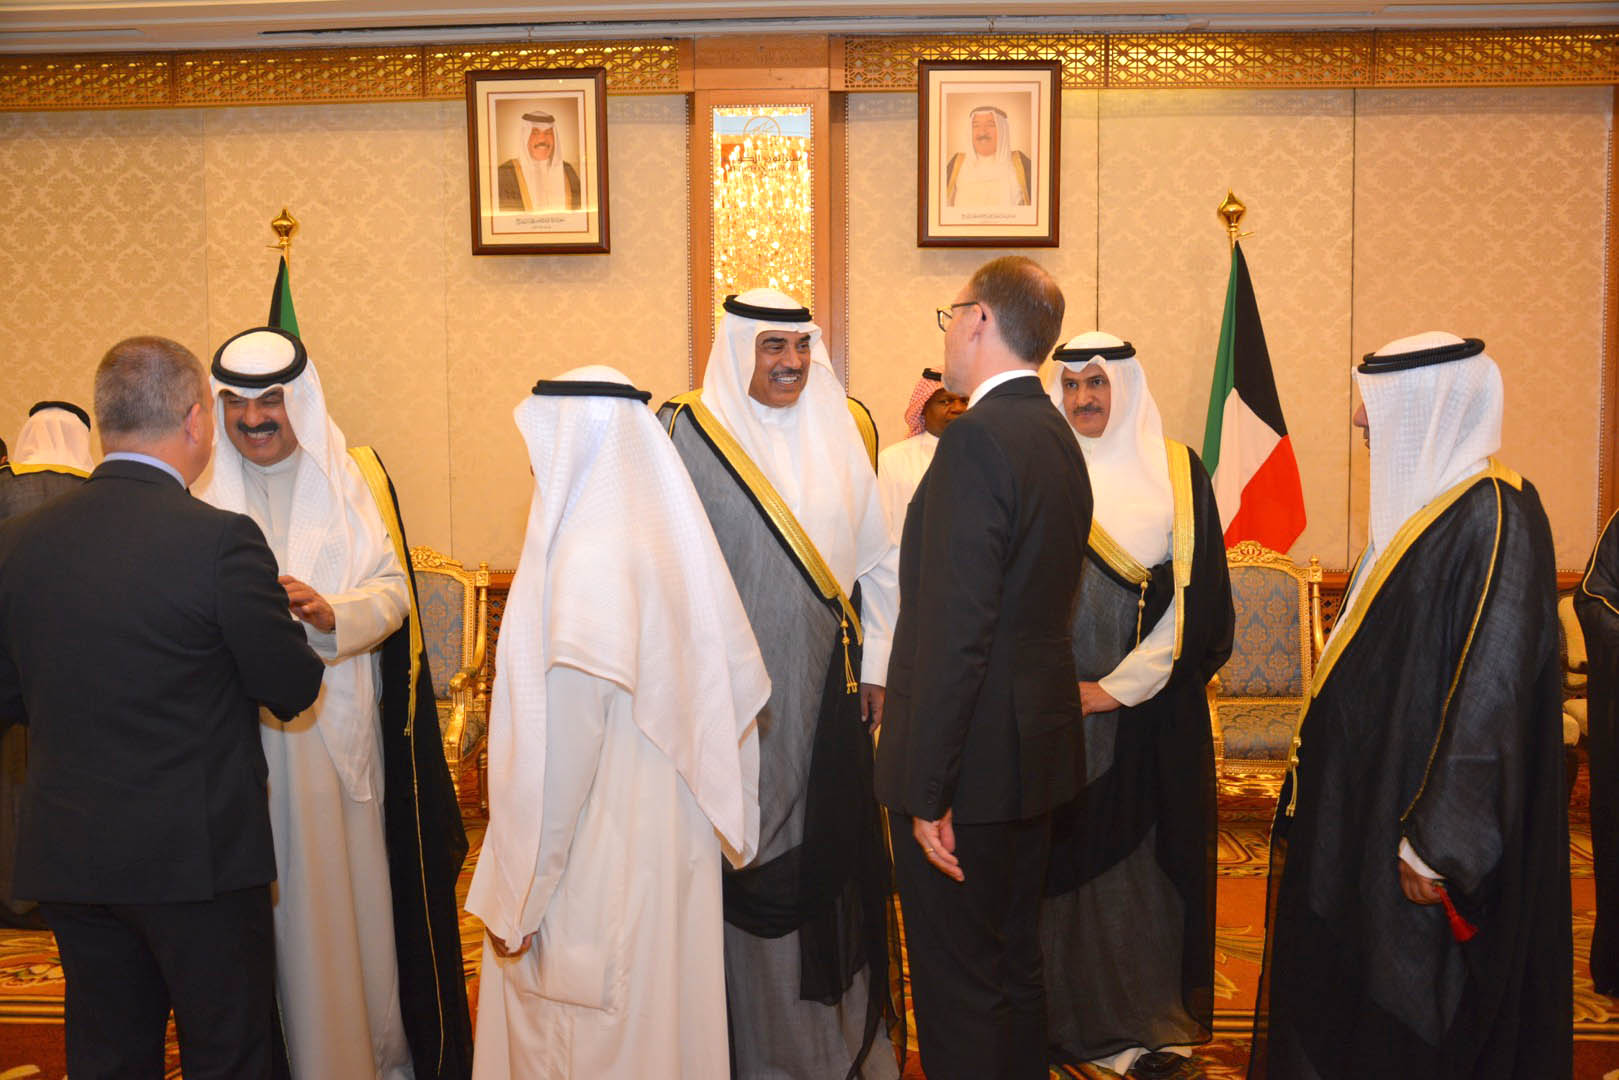 Acting Prime Minister and Foreign Minister Sheikh Sabah Khaled receives heads of missions abroad to the dinner banquet